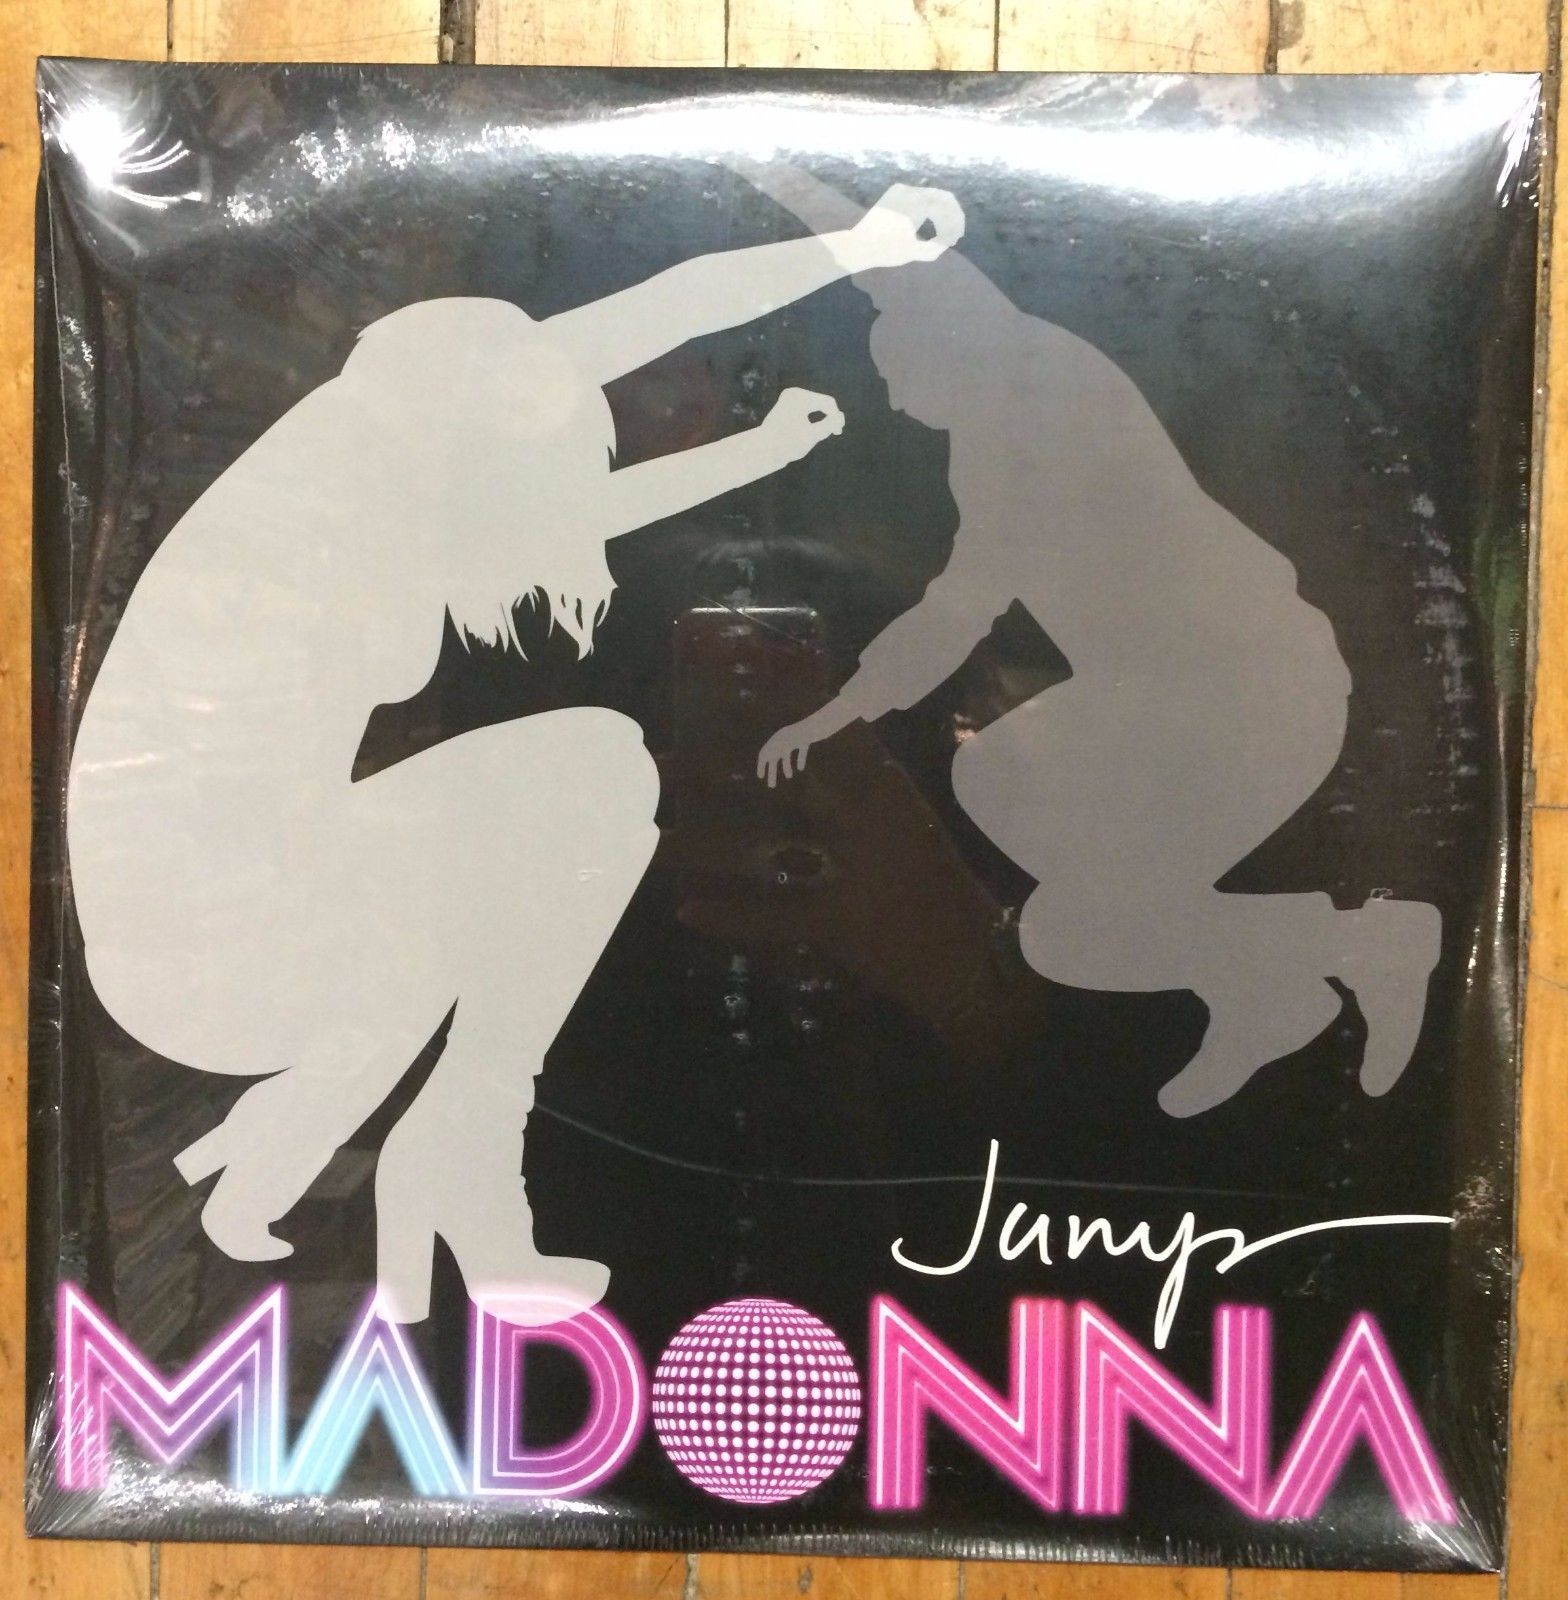 Madonna “Jump” [12 inch vinyl] double LP single [2x12] SEALED 2006 NEW! Electro 